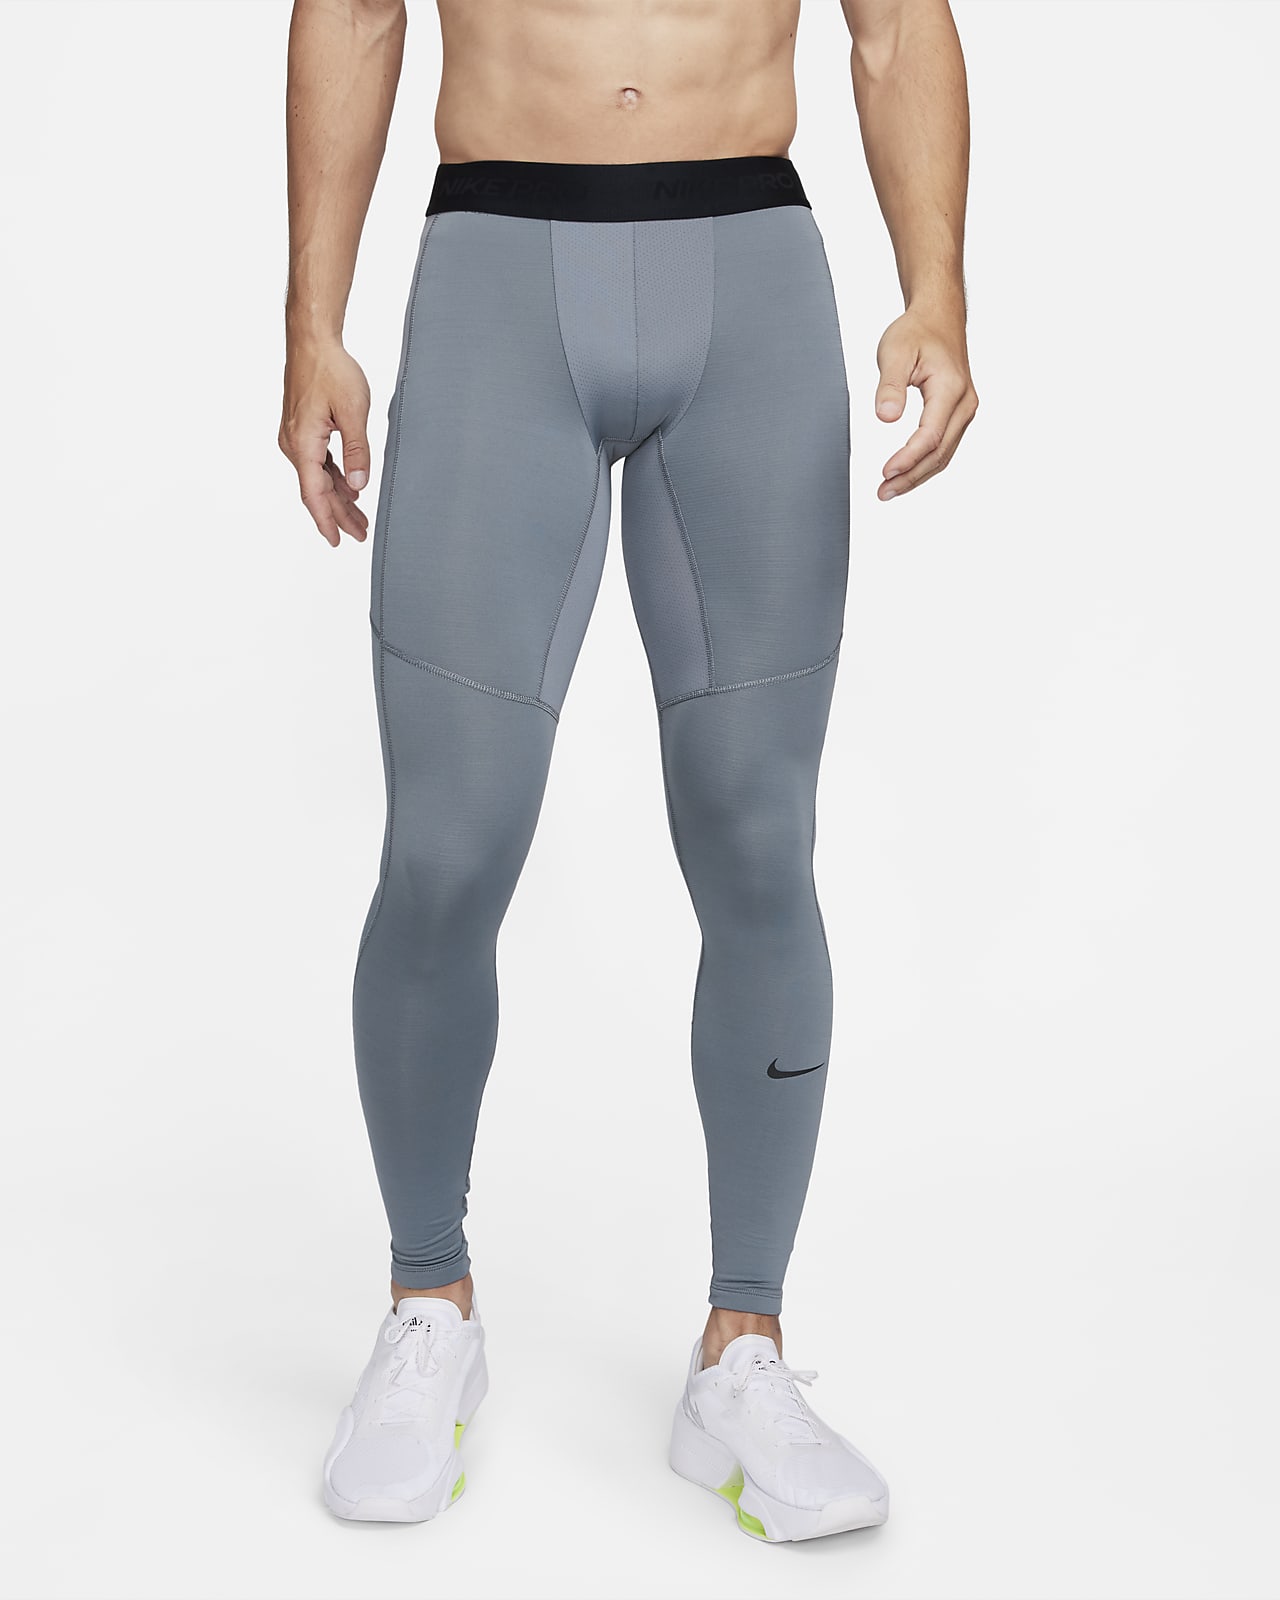 Nike Compression Tights On Sale